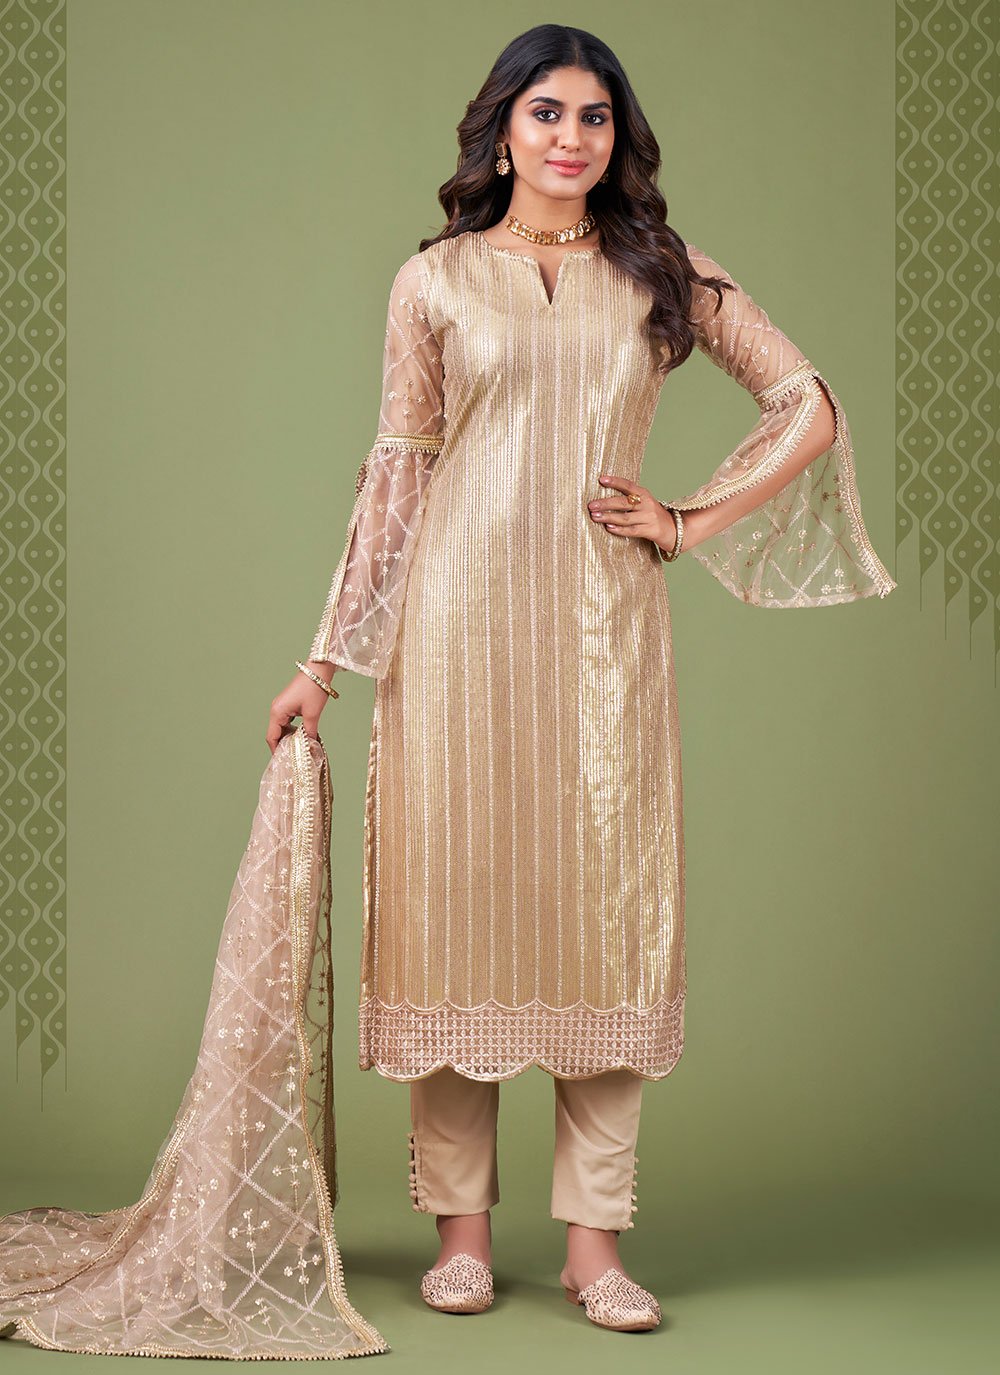 Buy Golden & Pink Embroidered Salwar Suit Online in India at Lowest Prices  - Price in India - buysnip.com